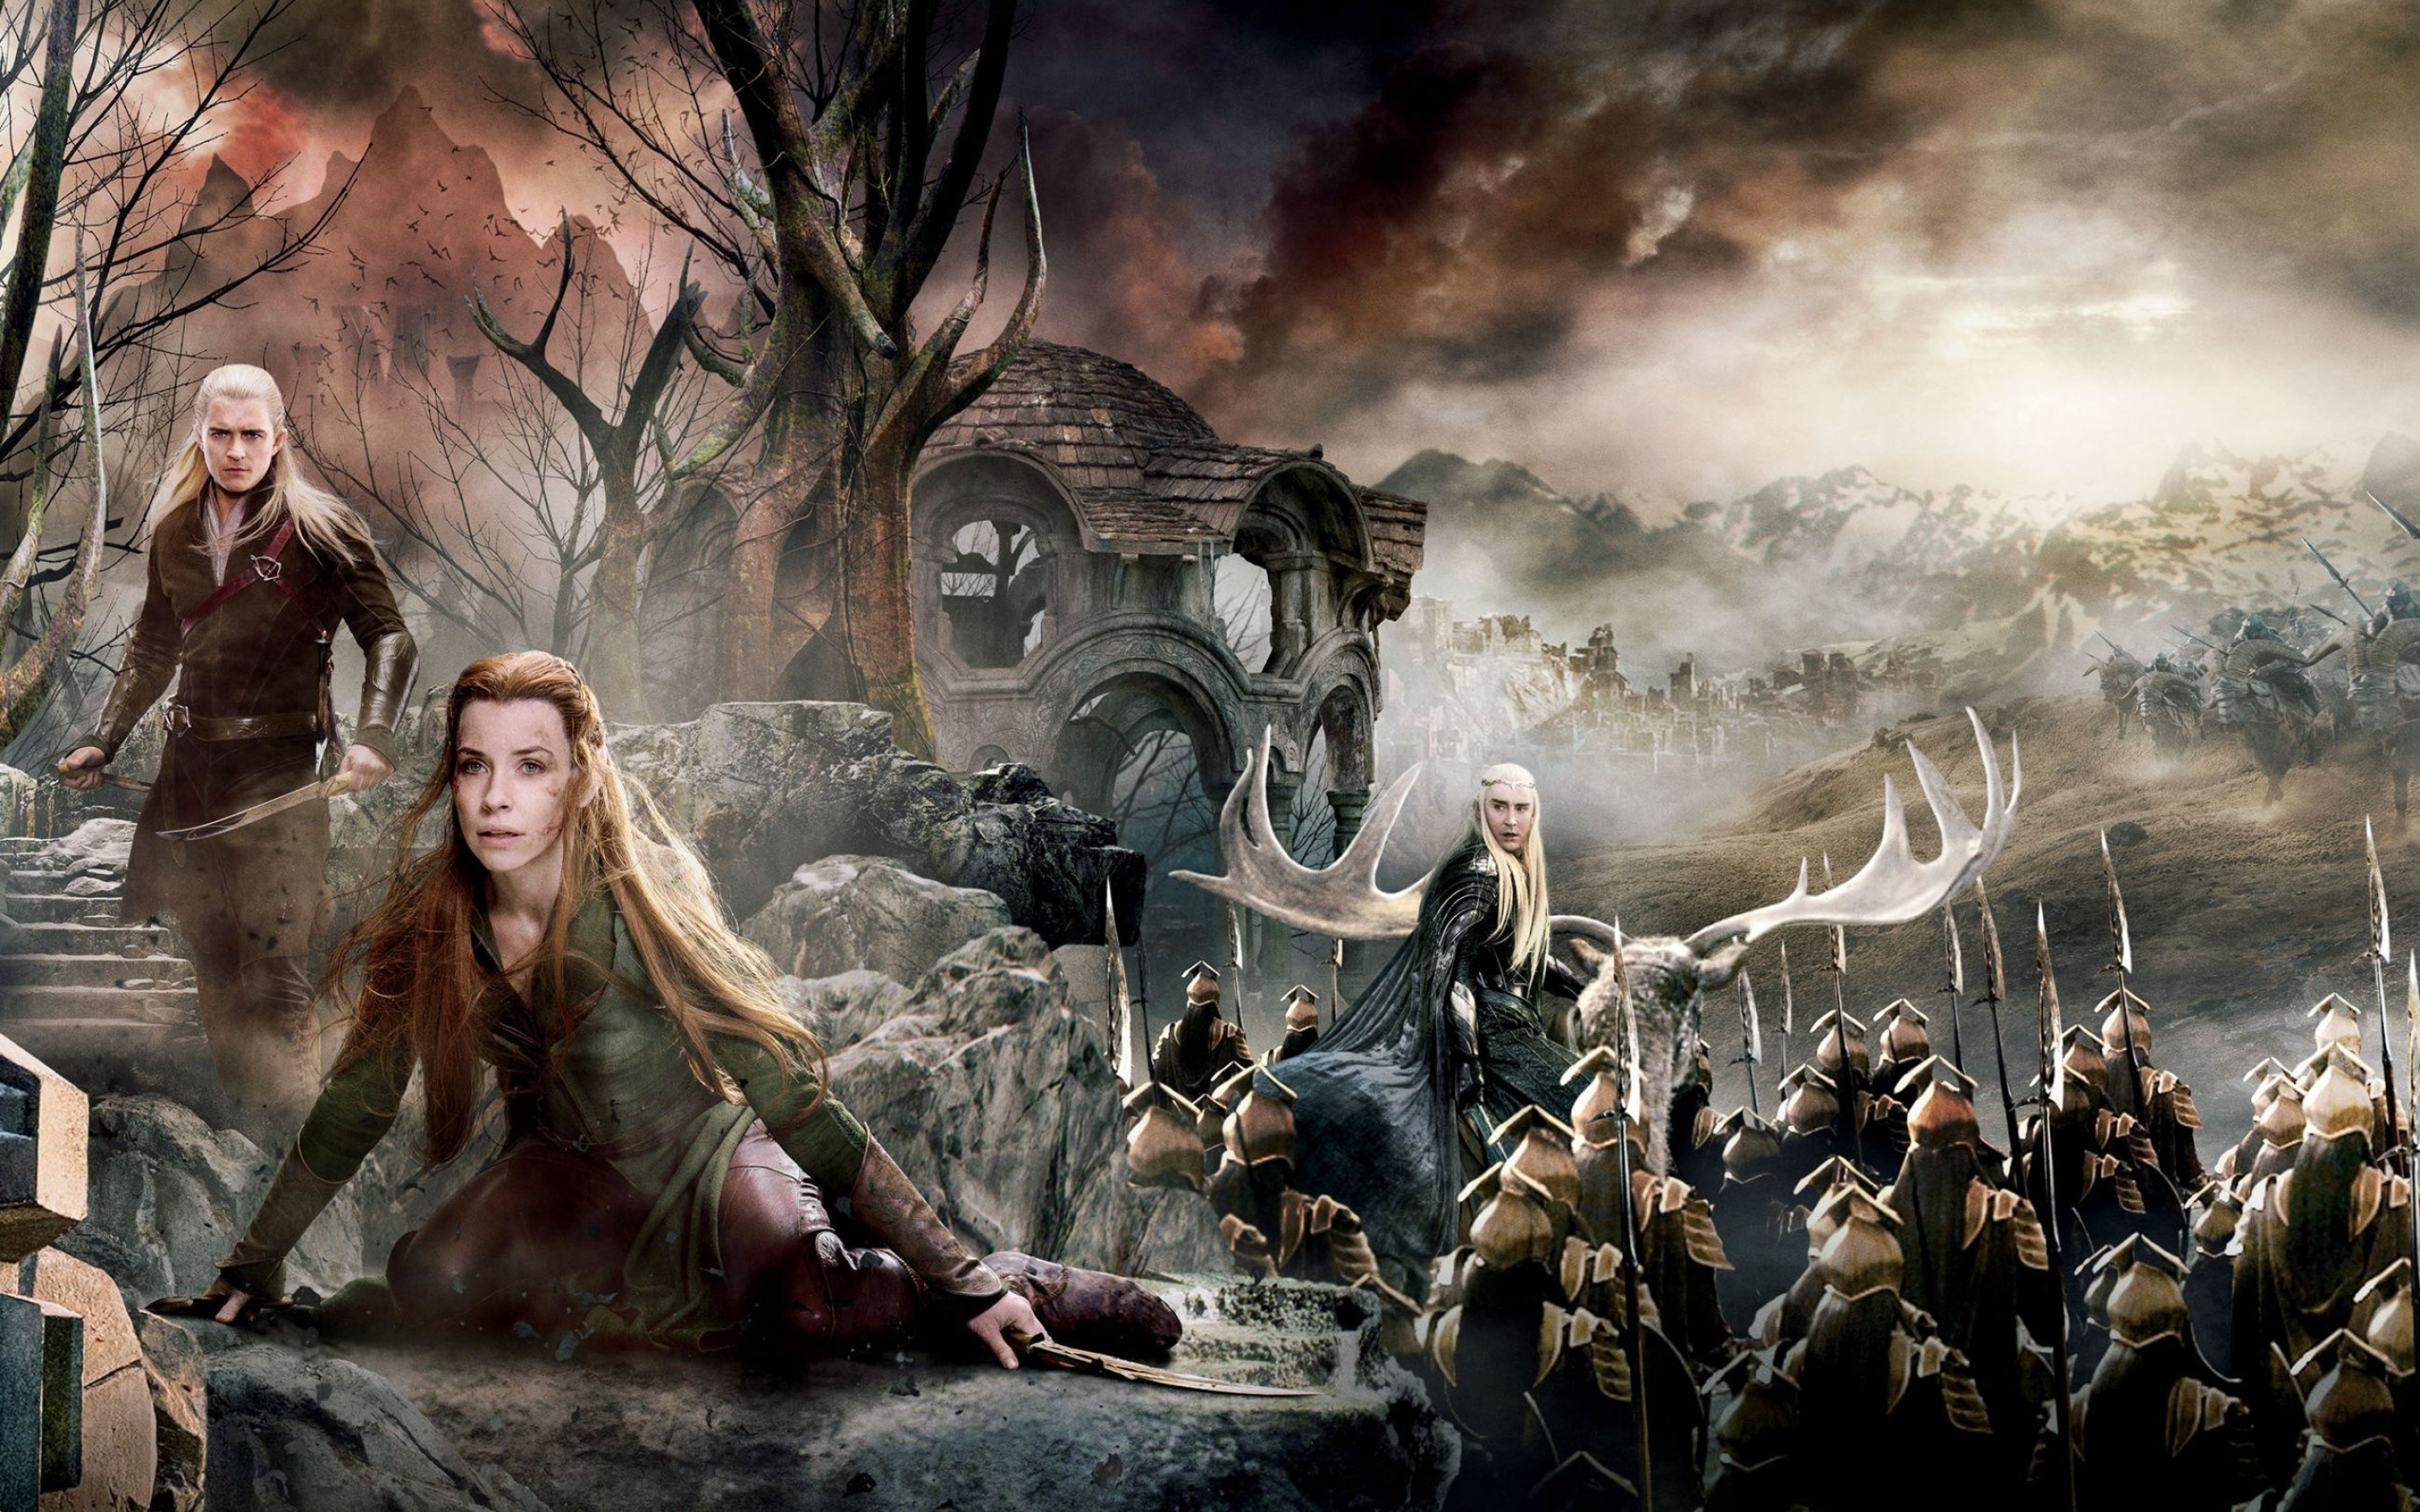 Battle of the Five Armies, Harry Potter, Dual screen wallpapers, Movie crossover, 2880x1800 HD Desktop